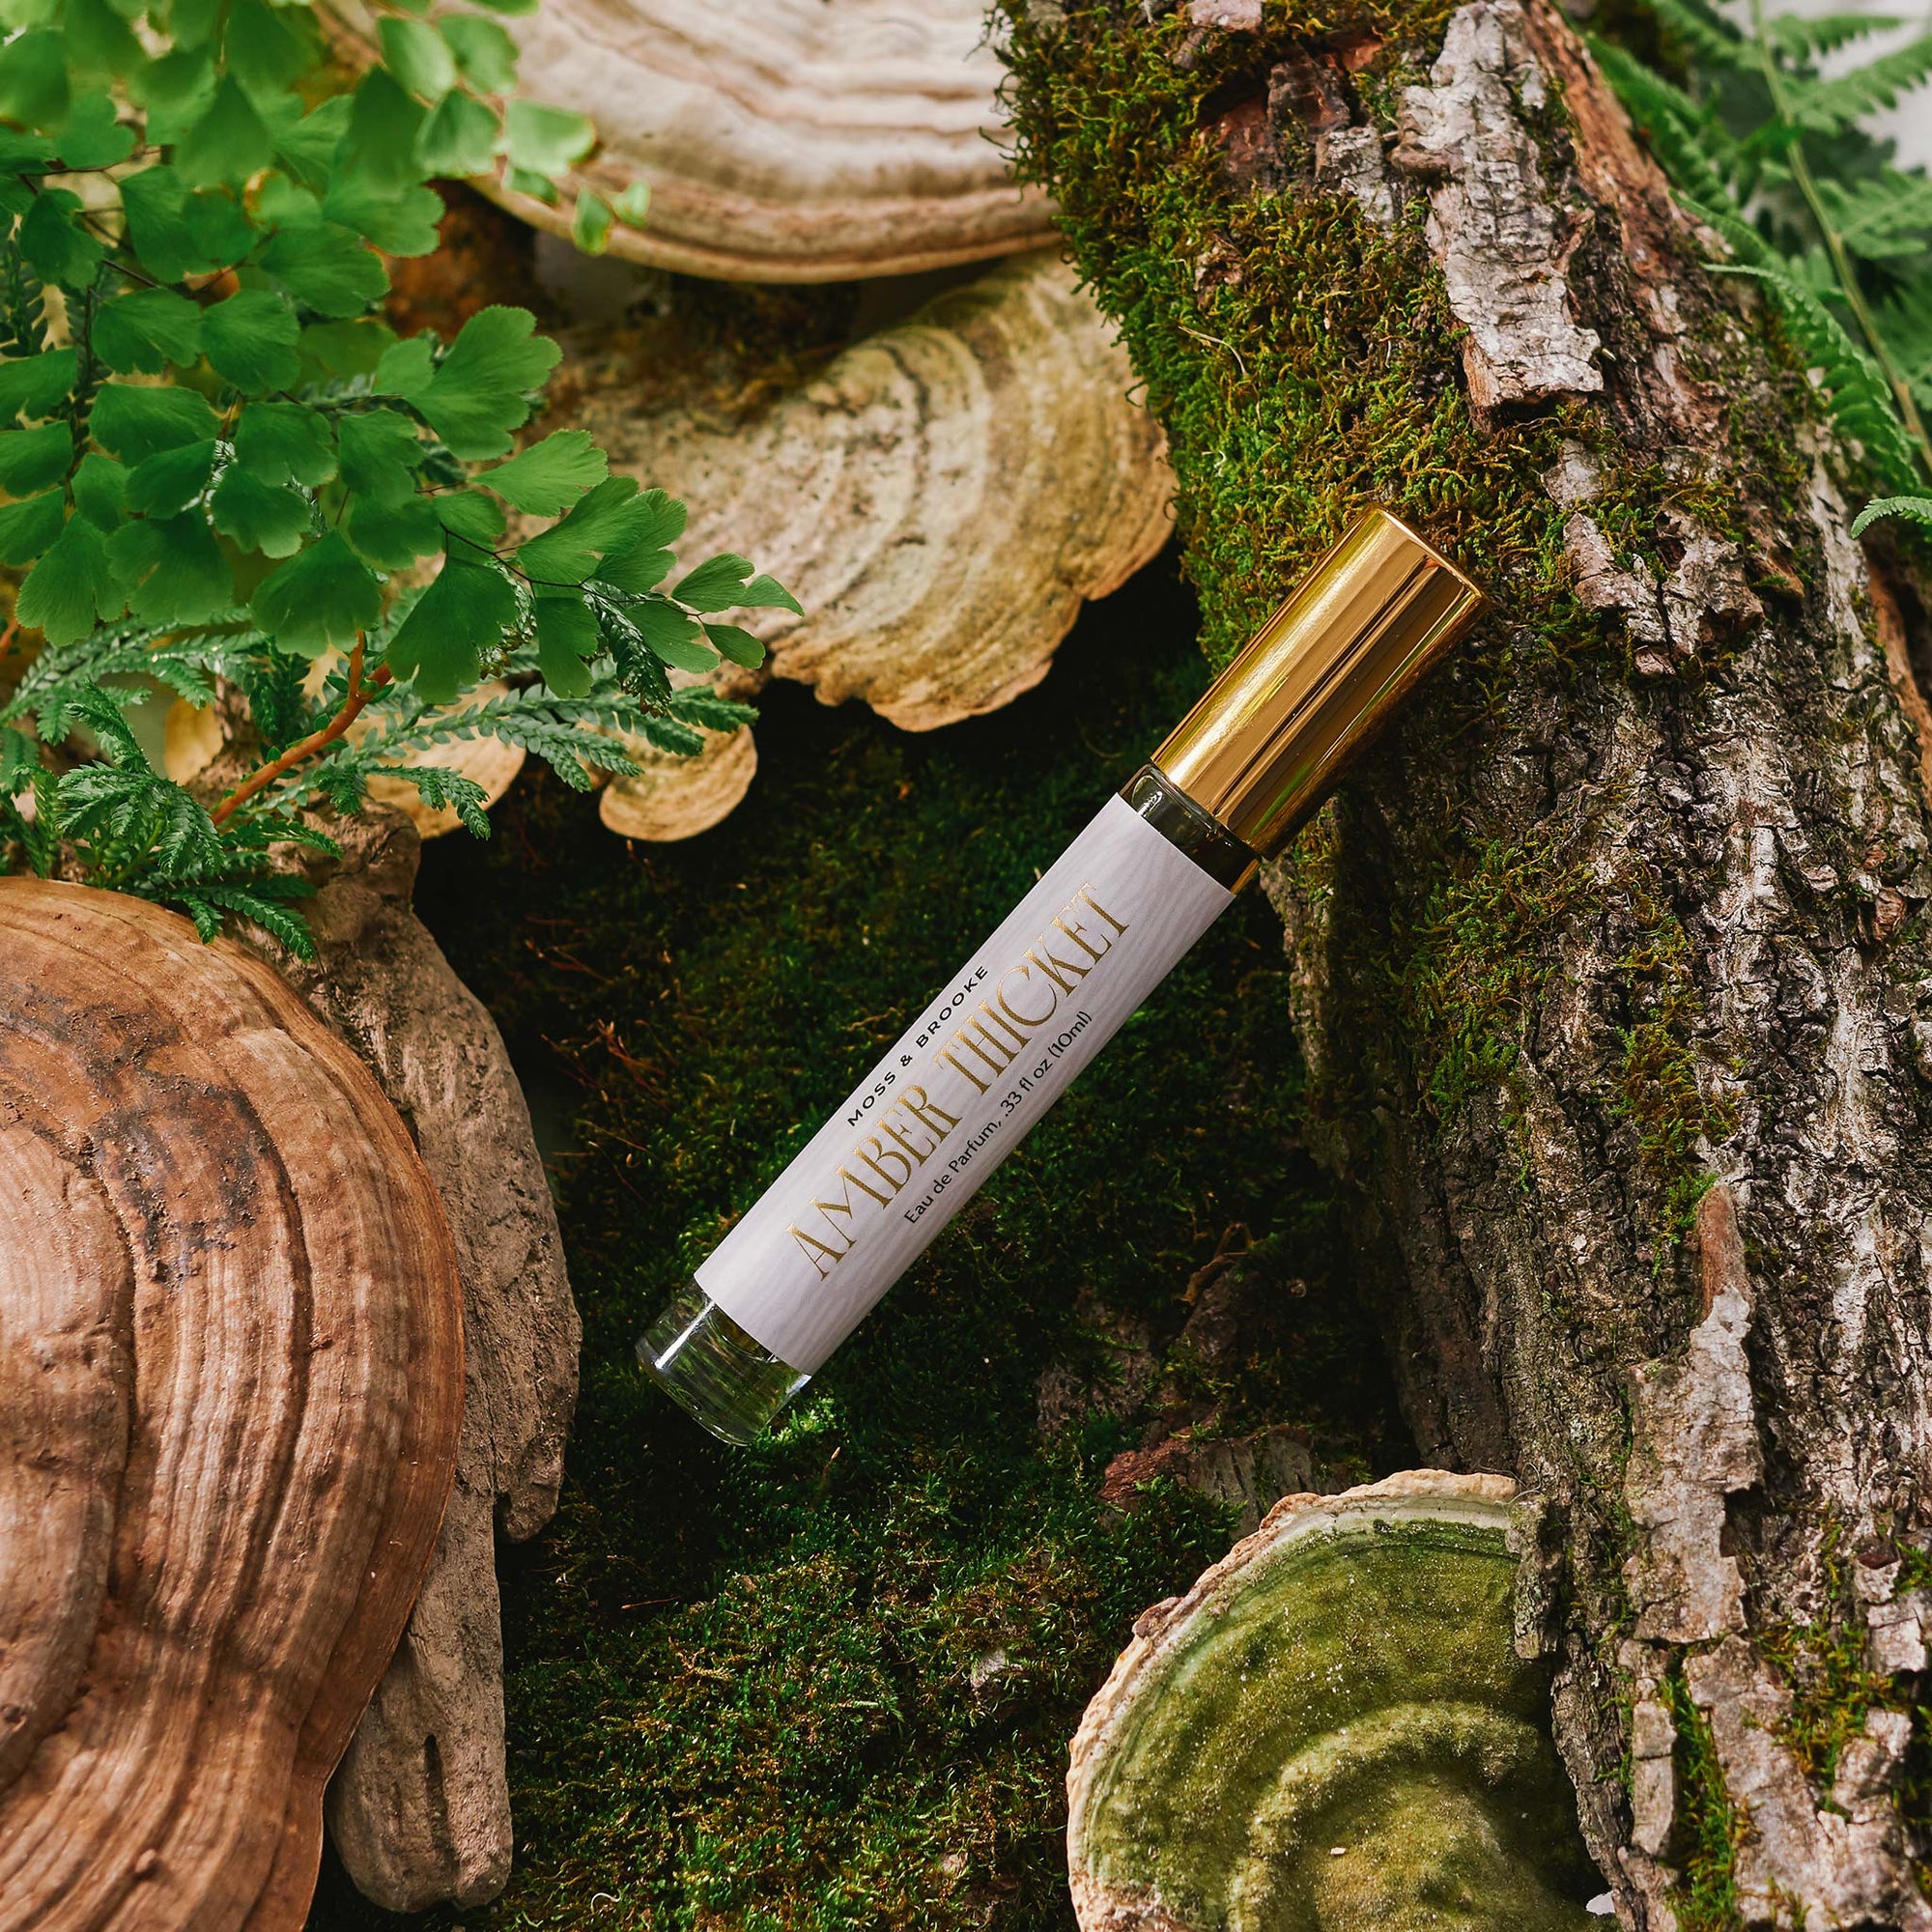 Slim round glass bottle with gold cap and gray label with metallic gold text. Amber Thicket natural botanical perfume is scented with linden, beeswax, apricot, bergamot, hay, patchouli and ylang ylang. 